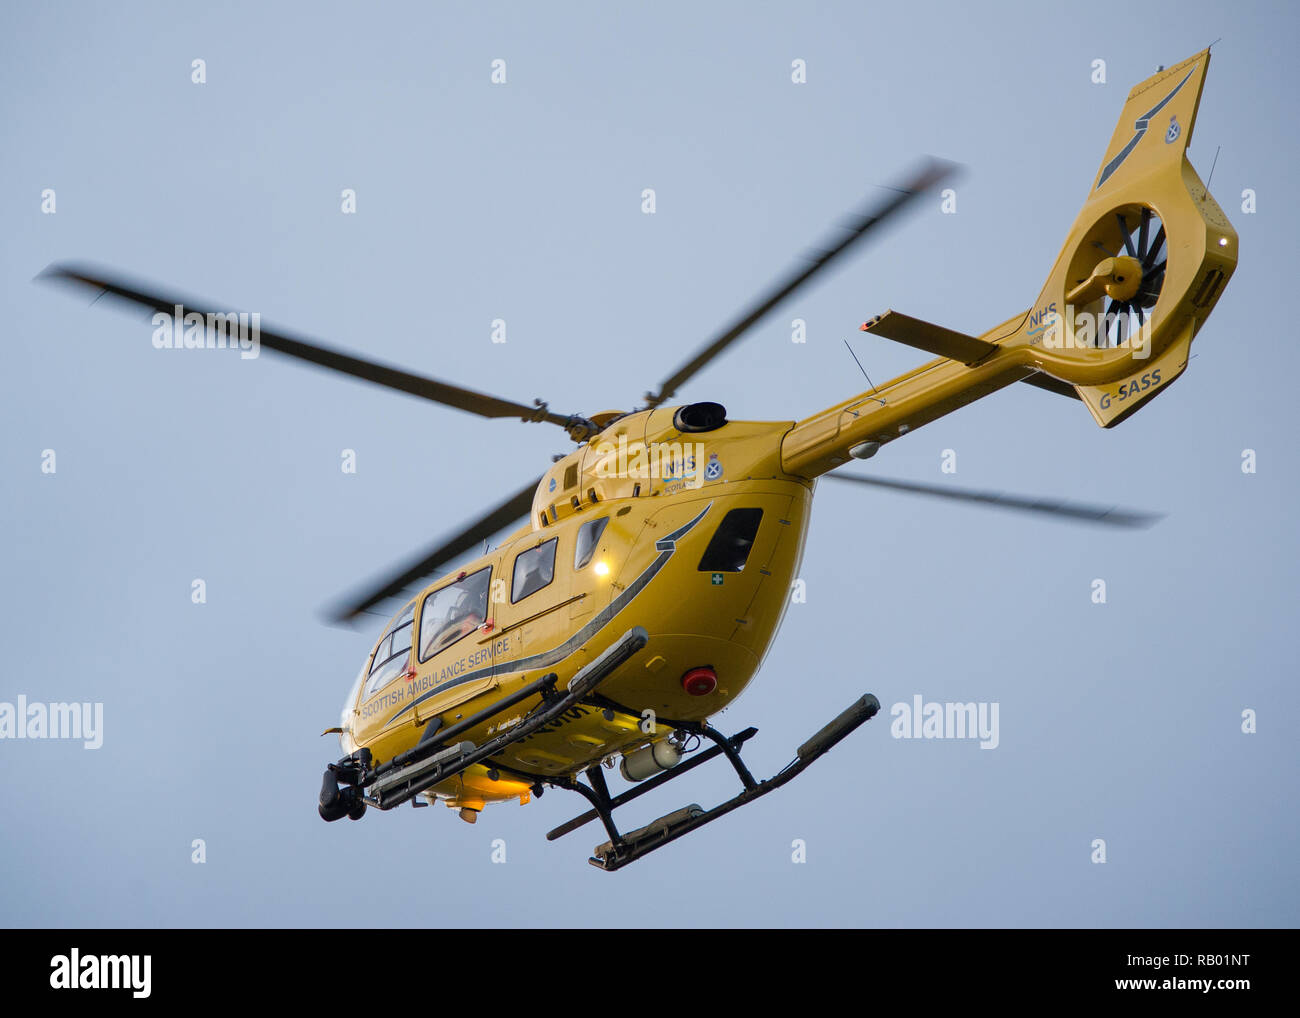 The Scottish Air Ambulance service provides essential life saving services to the National Health Service. Glasgow International Airport, UK. Stock Photo